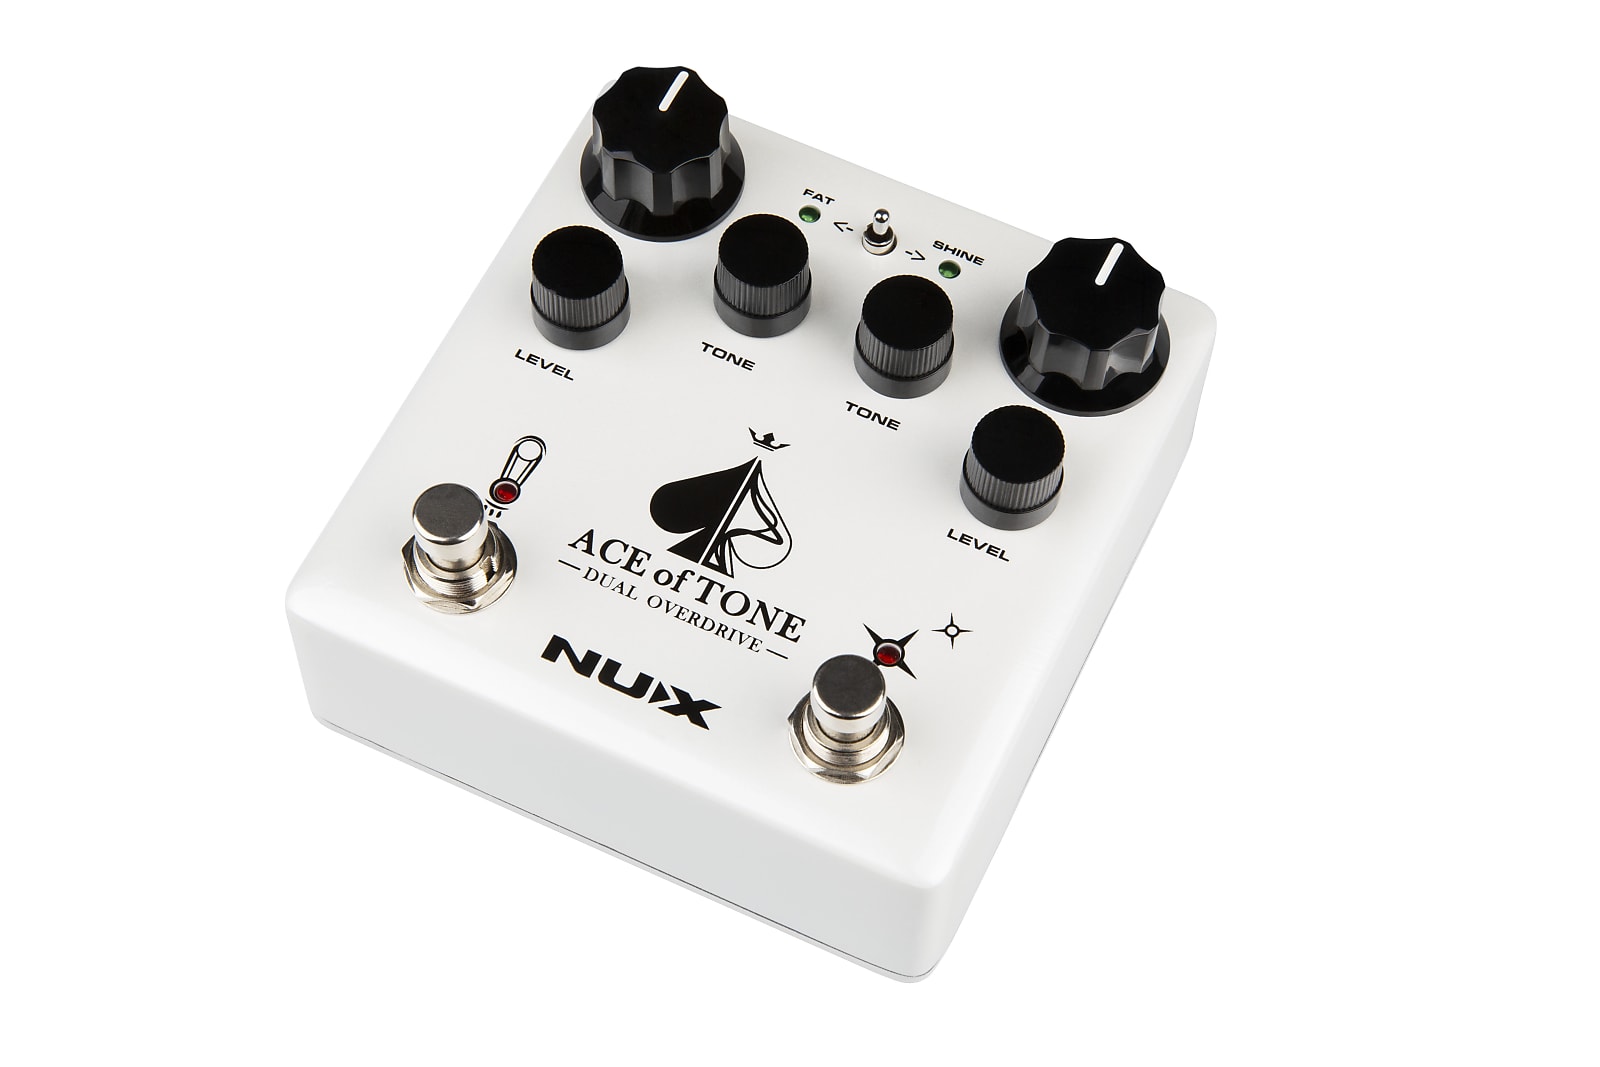 NuX NDO-5 Ace of Tone Dual Overdrive Verdugo Series Effects Pedal